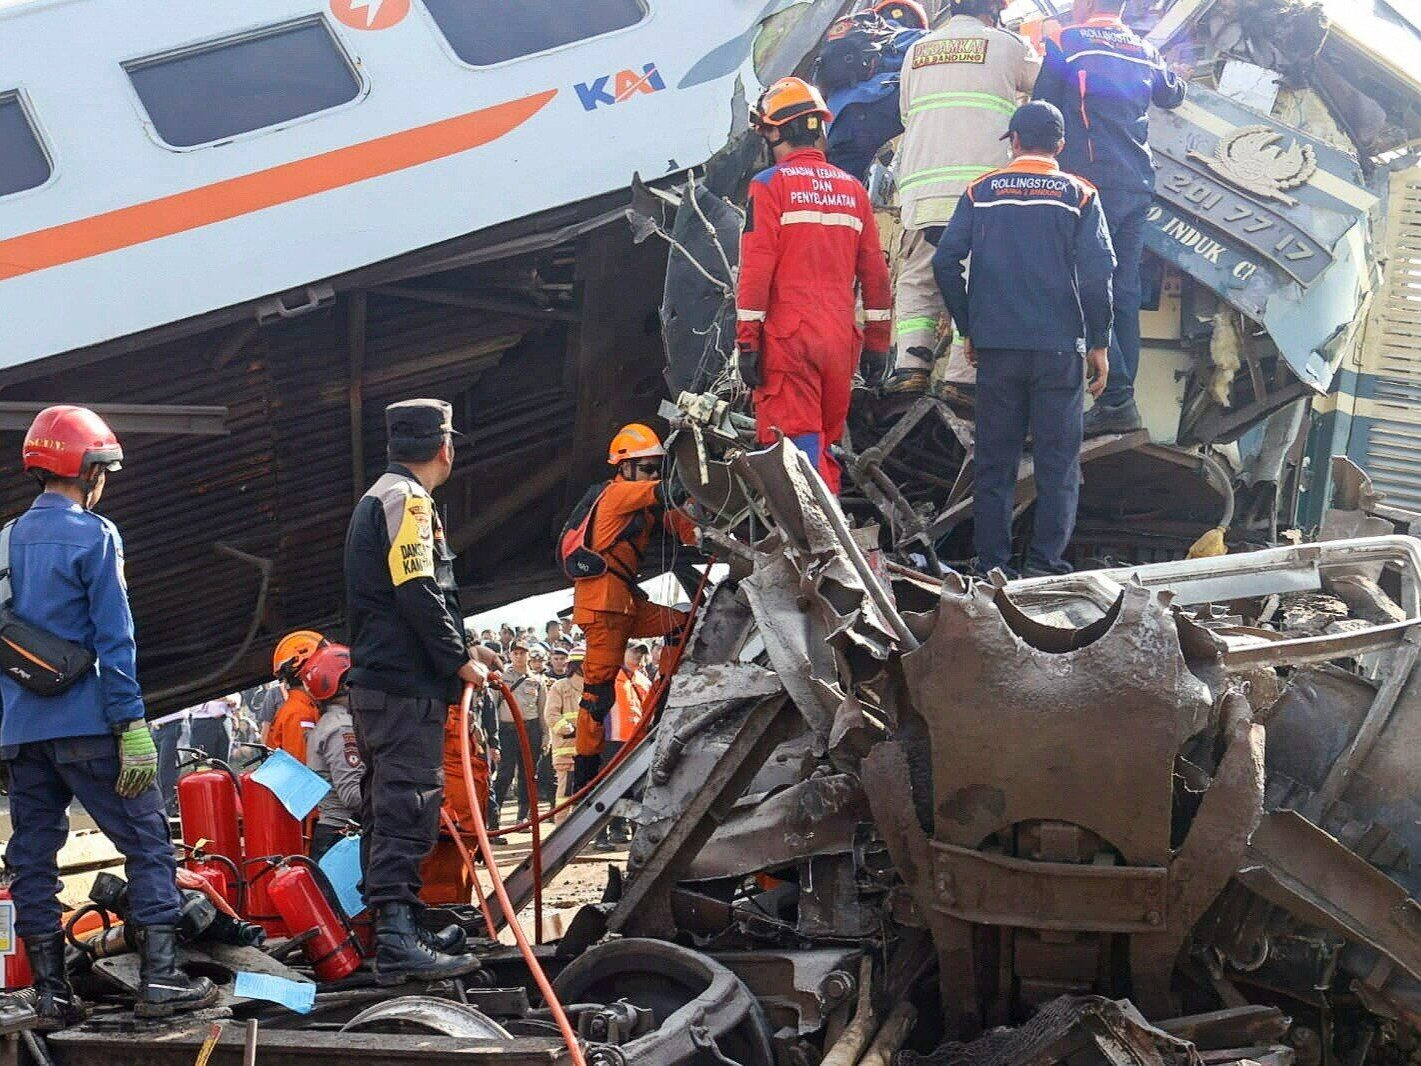 Two trains collide.  Four people are dead, dozens injured